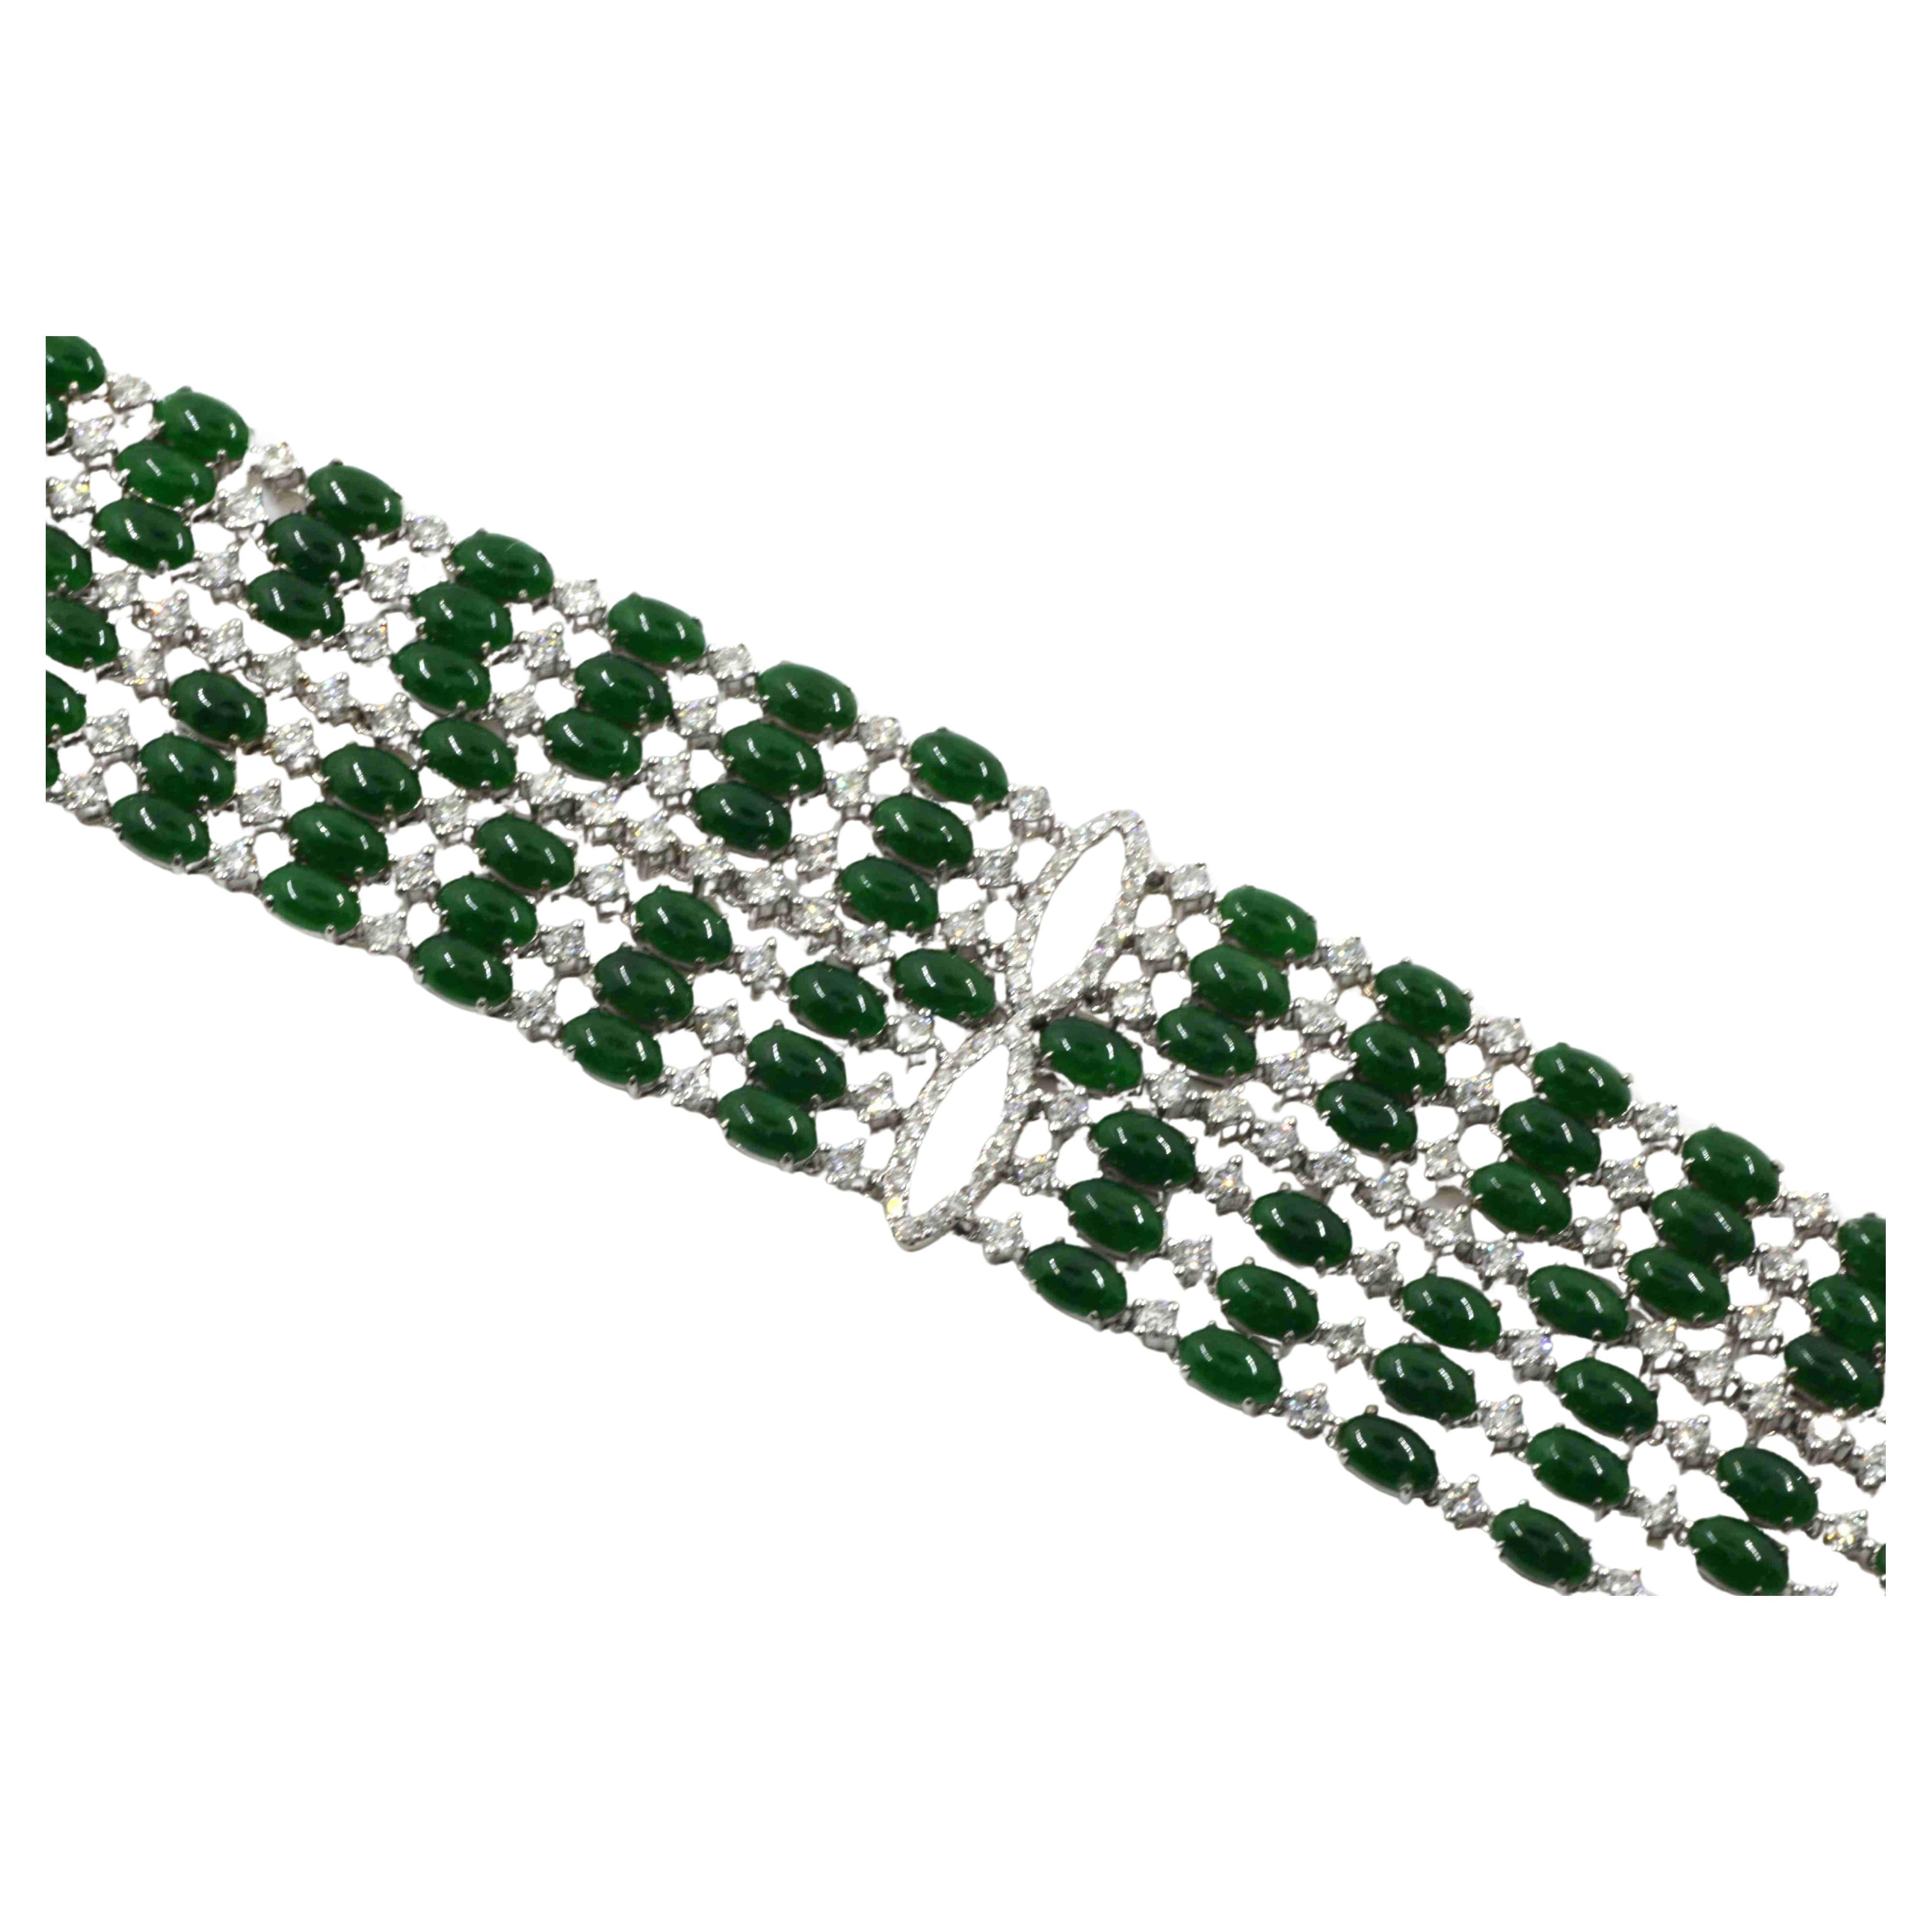 This bracelet is a stunning piece of jewelry, a dazzling combination of classic elegance and modern luxury. The bracelet is expertly crafted from 18K white gold, which provides a sleek and sophisticated backdrop for the gemstones.

Featuring 4.73